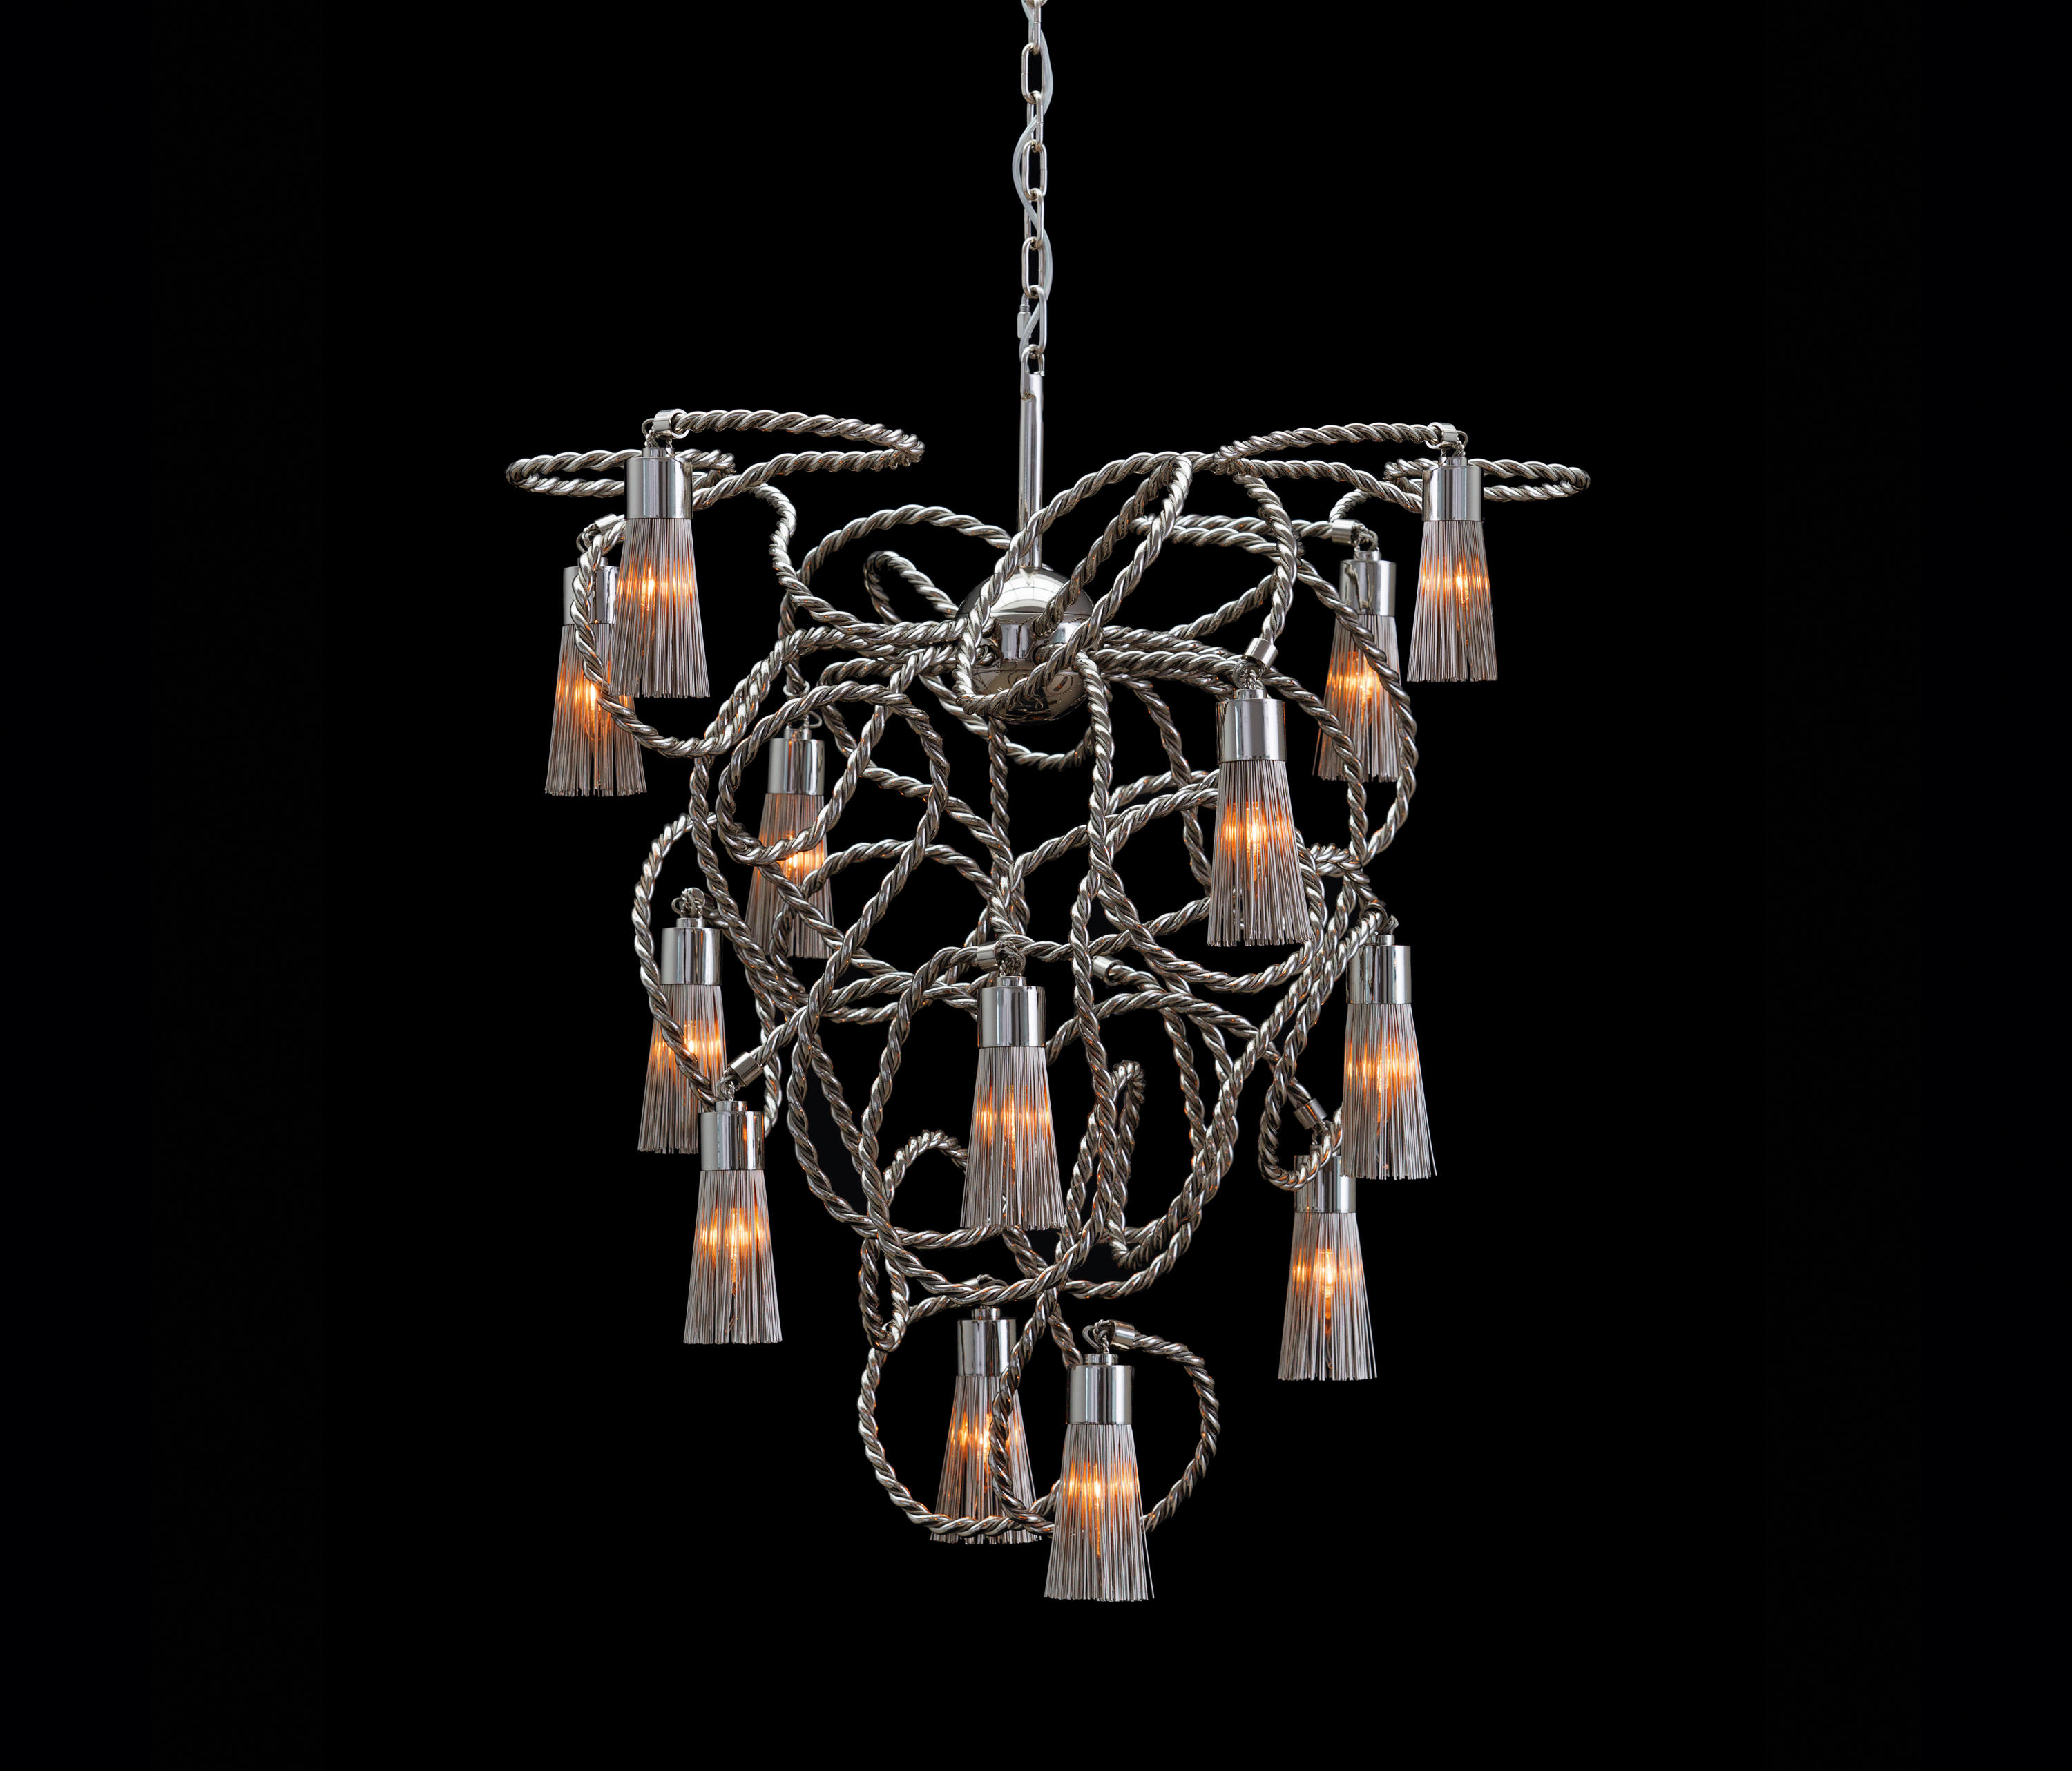 Sultans Of Swing Chandelier Conical, What Is Swing From The Chandelier About